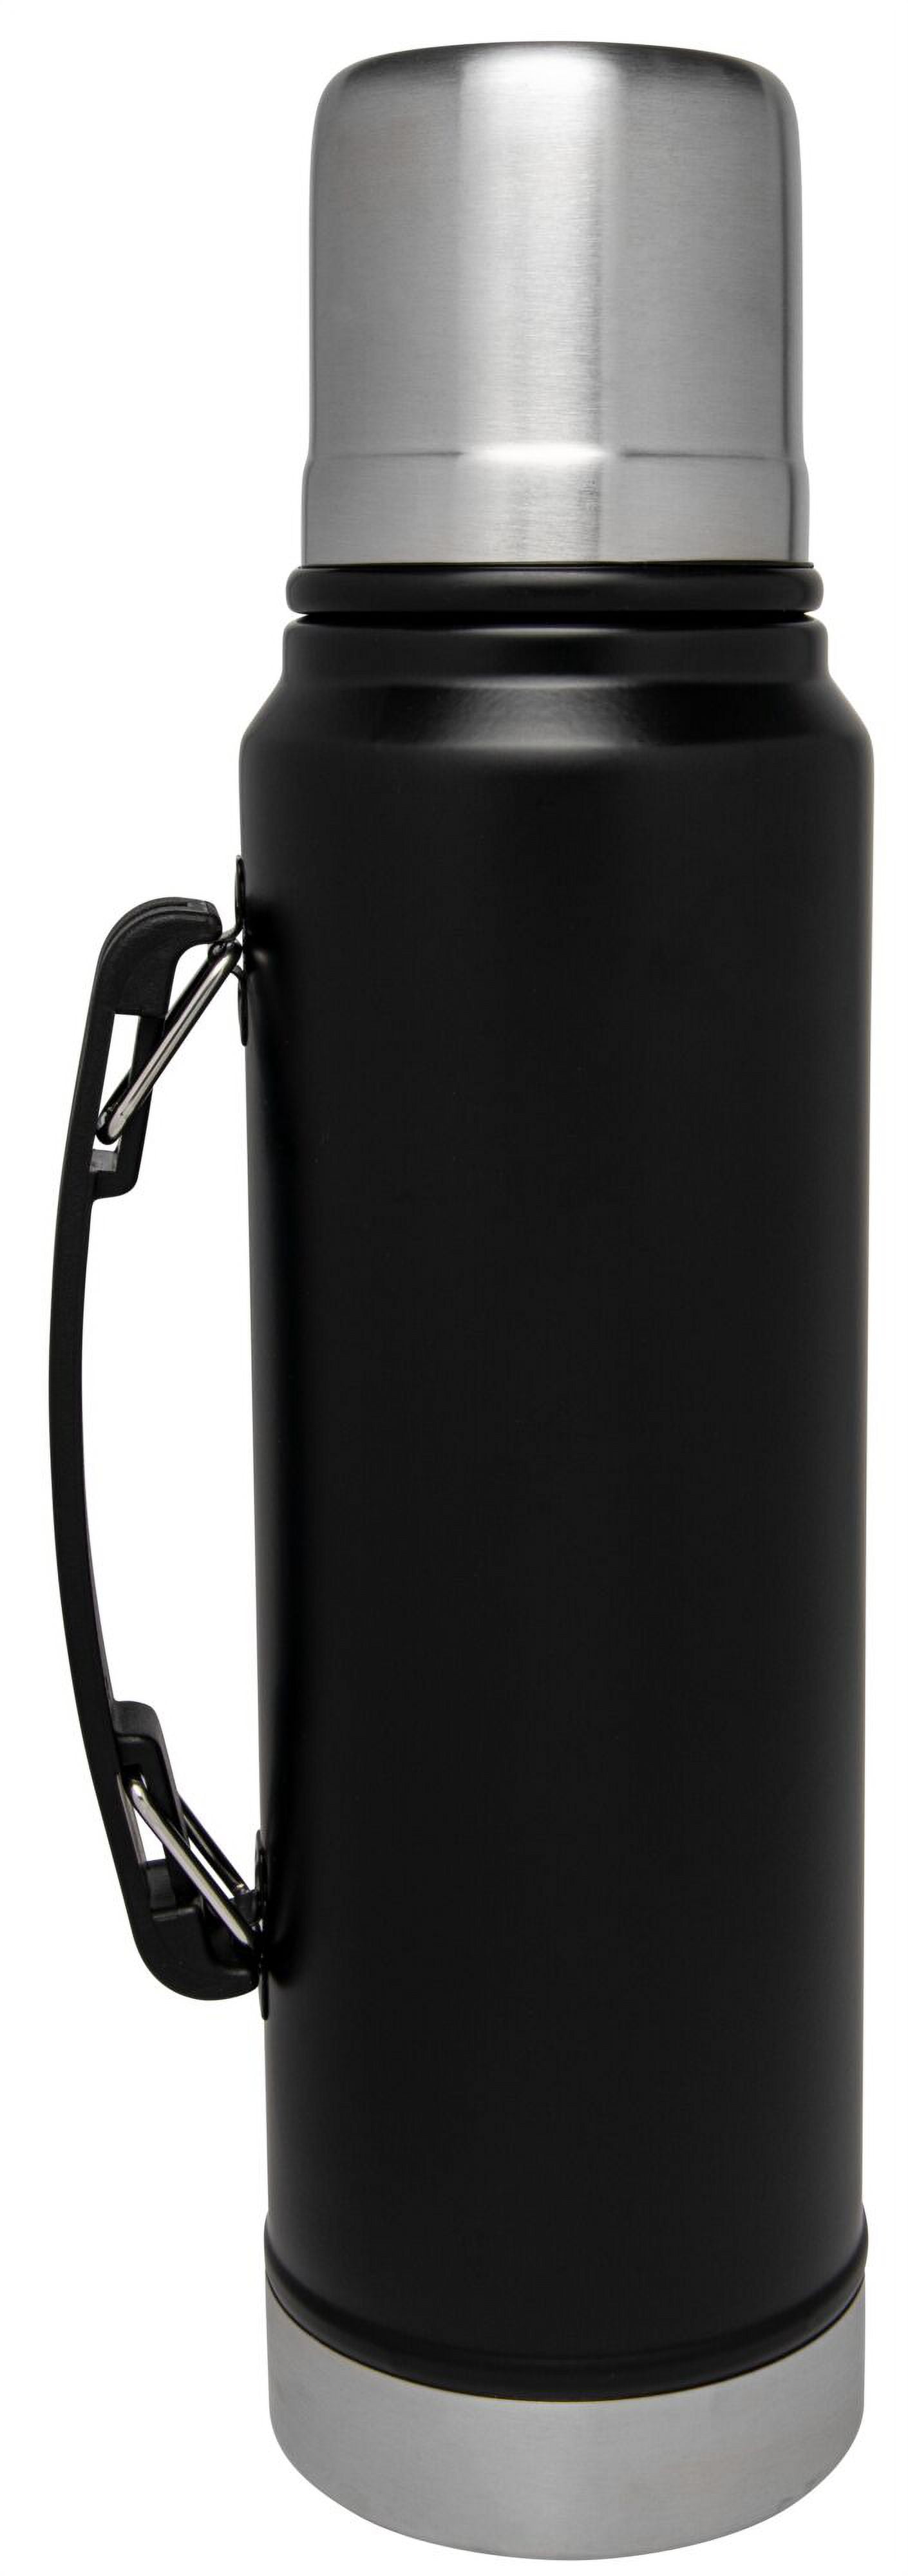 Dropship Stanley Classic Stainless Steel Vacuum Insulated Thermos Bottle,  1.1 Qt to Sell Online at a Lower Price